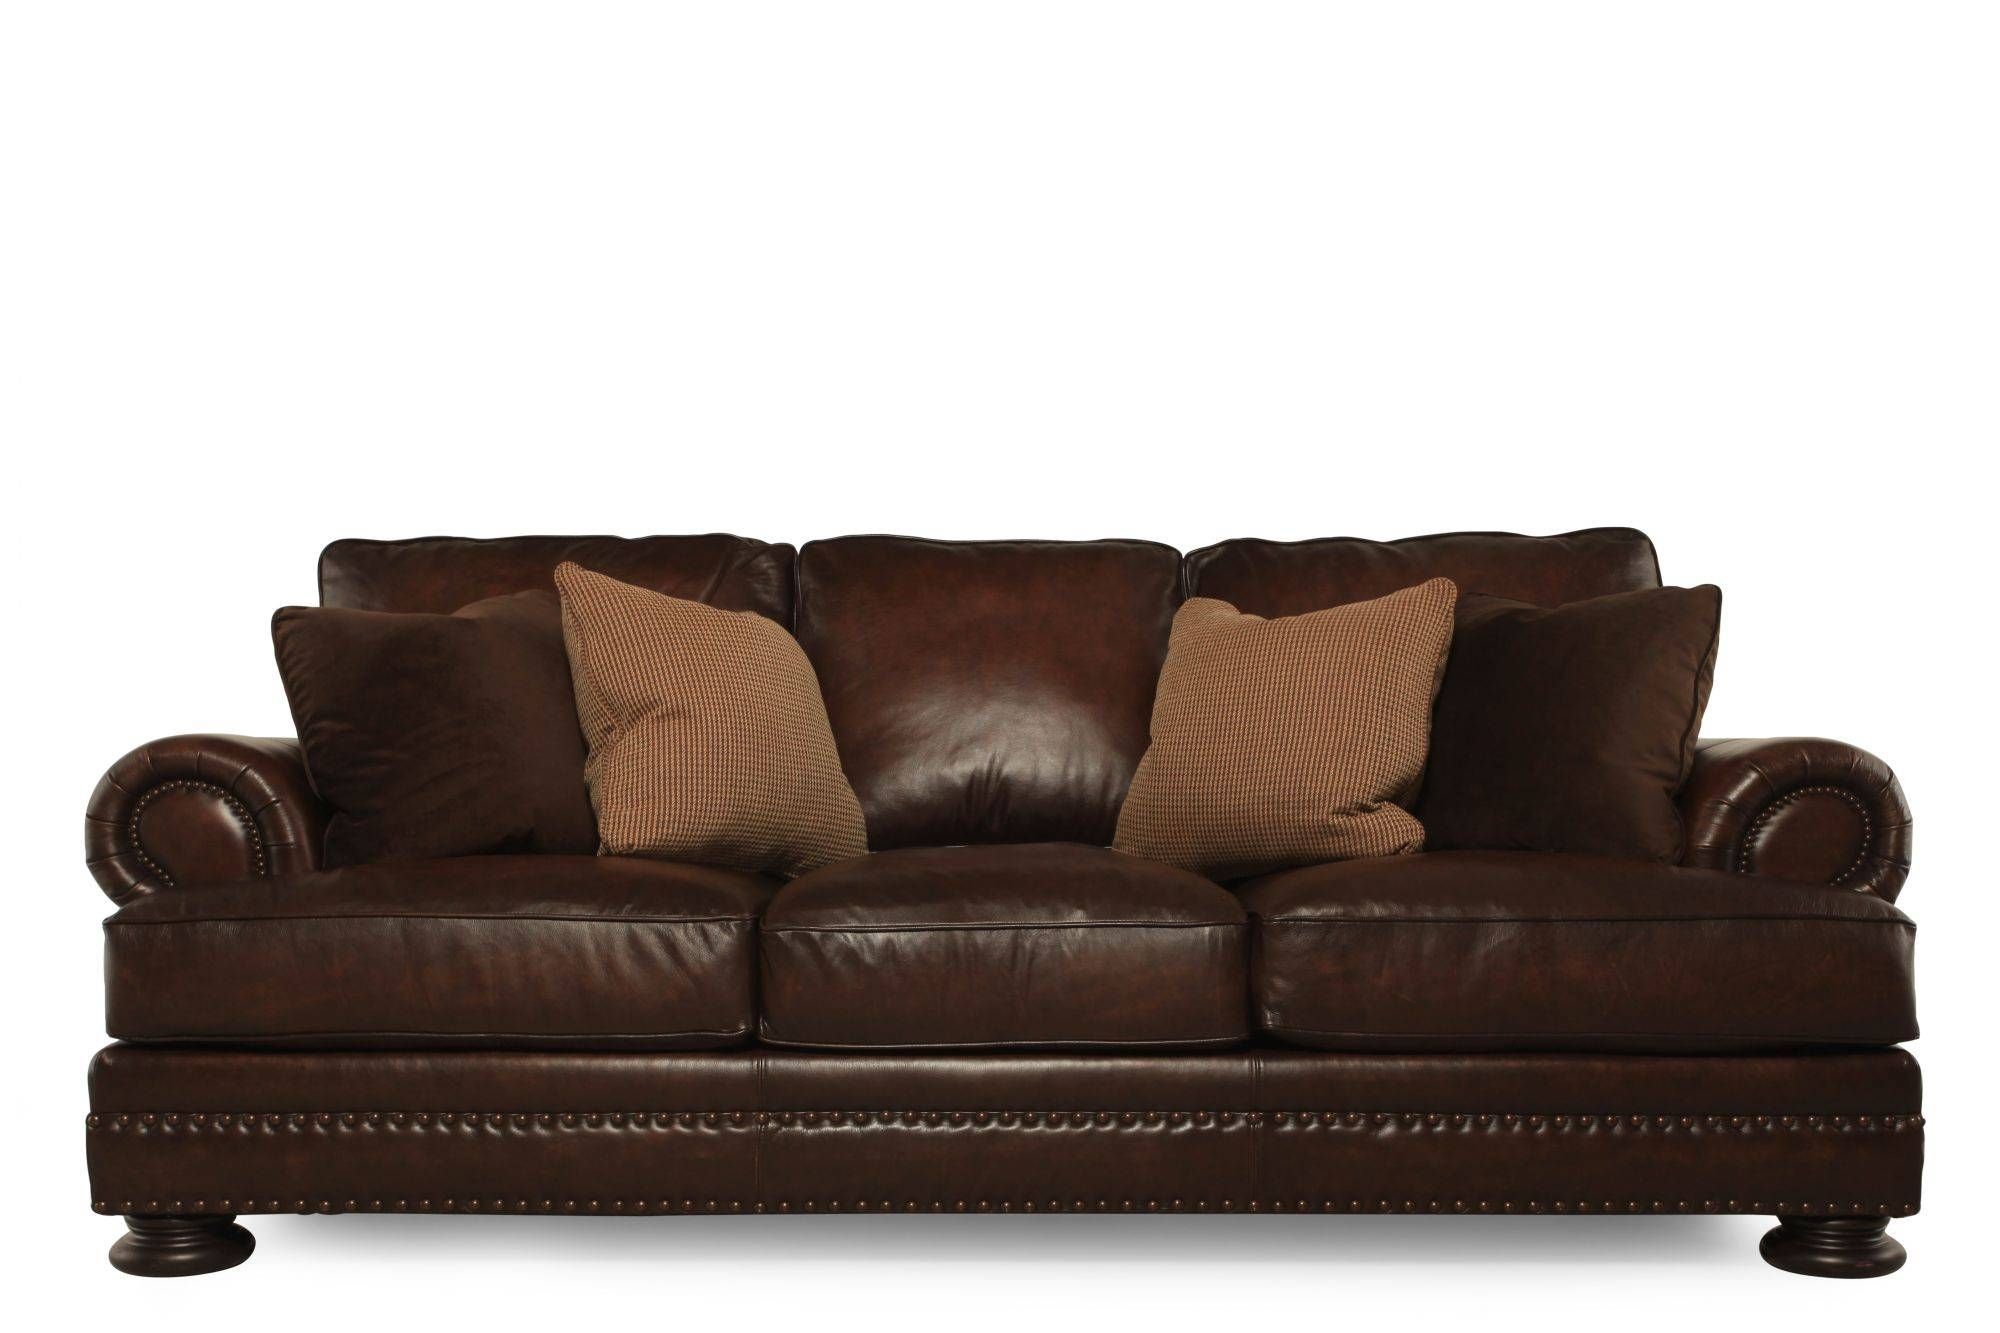 19 Foster Leather Sofa | Carehouse For Foster Leather Sofas (View 3 of 15)